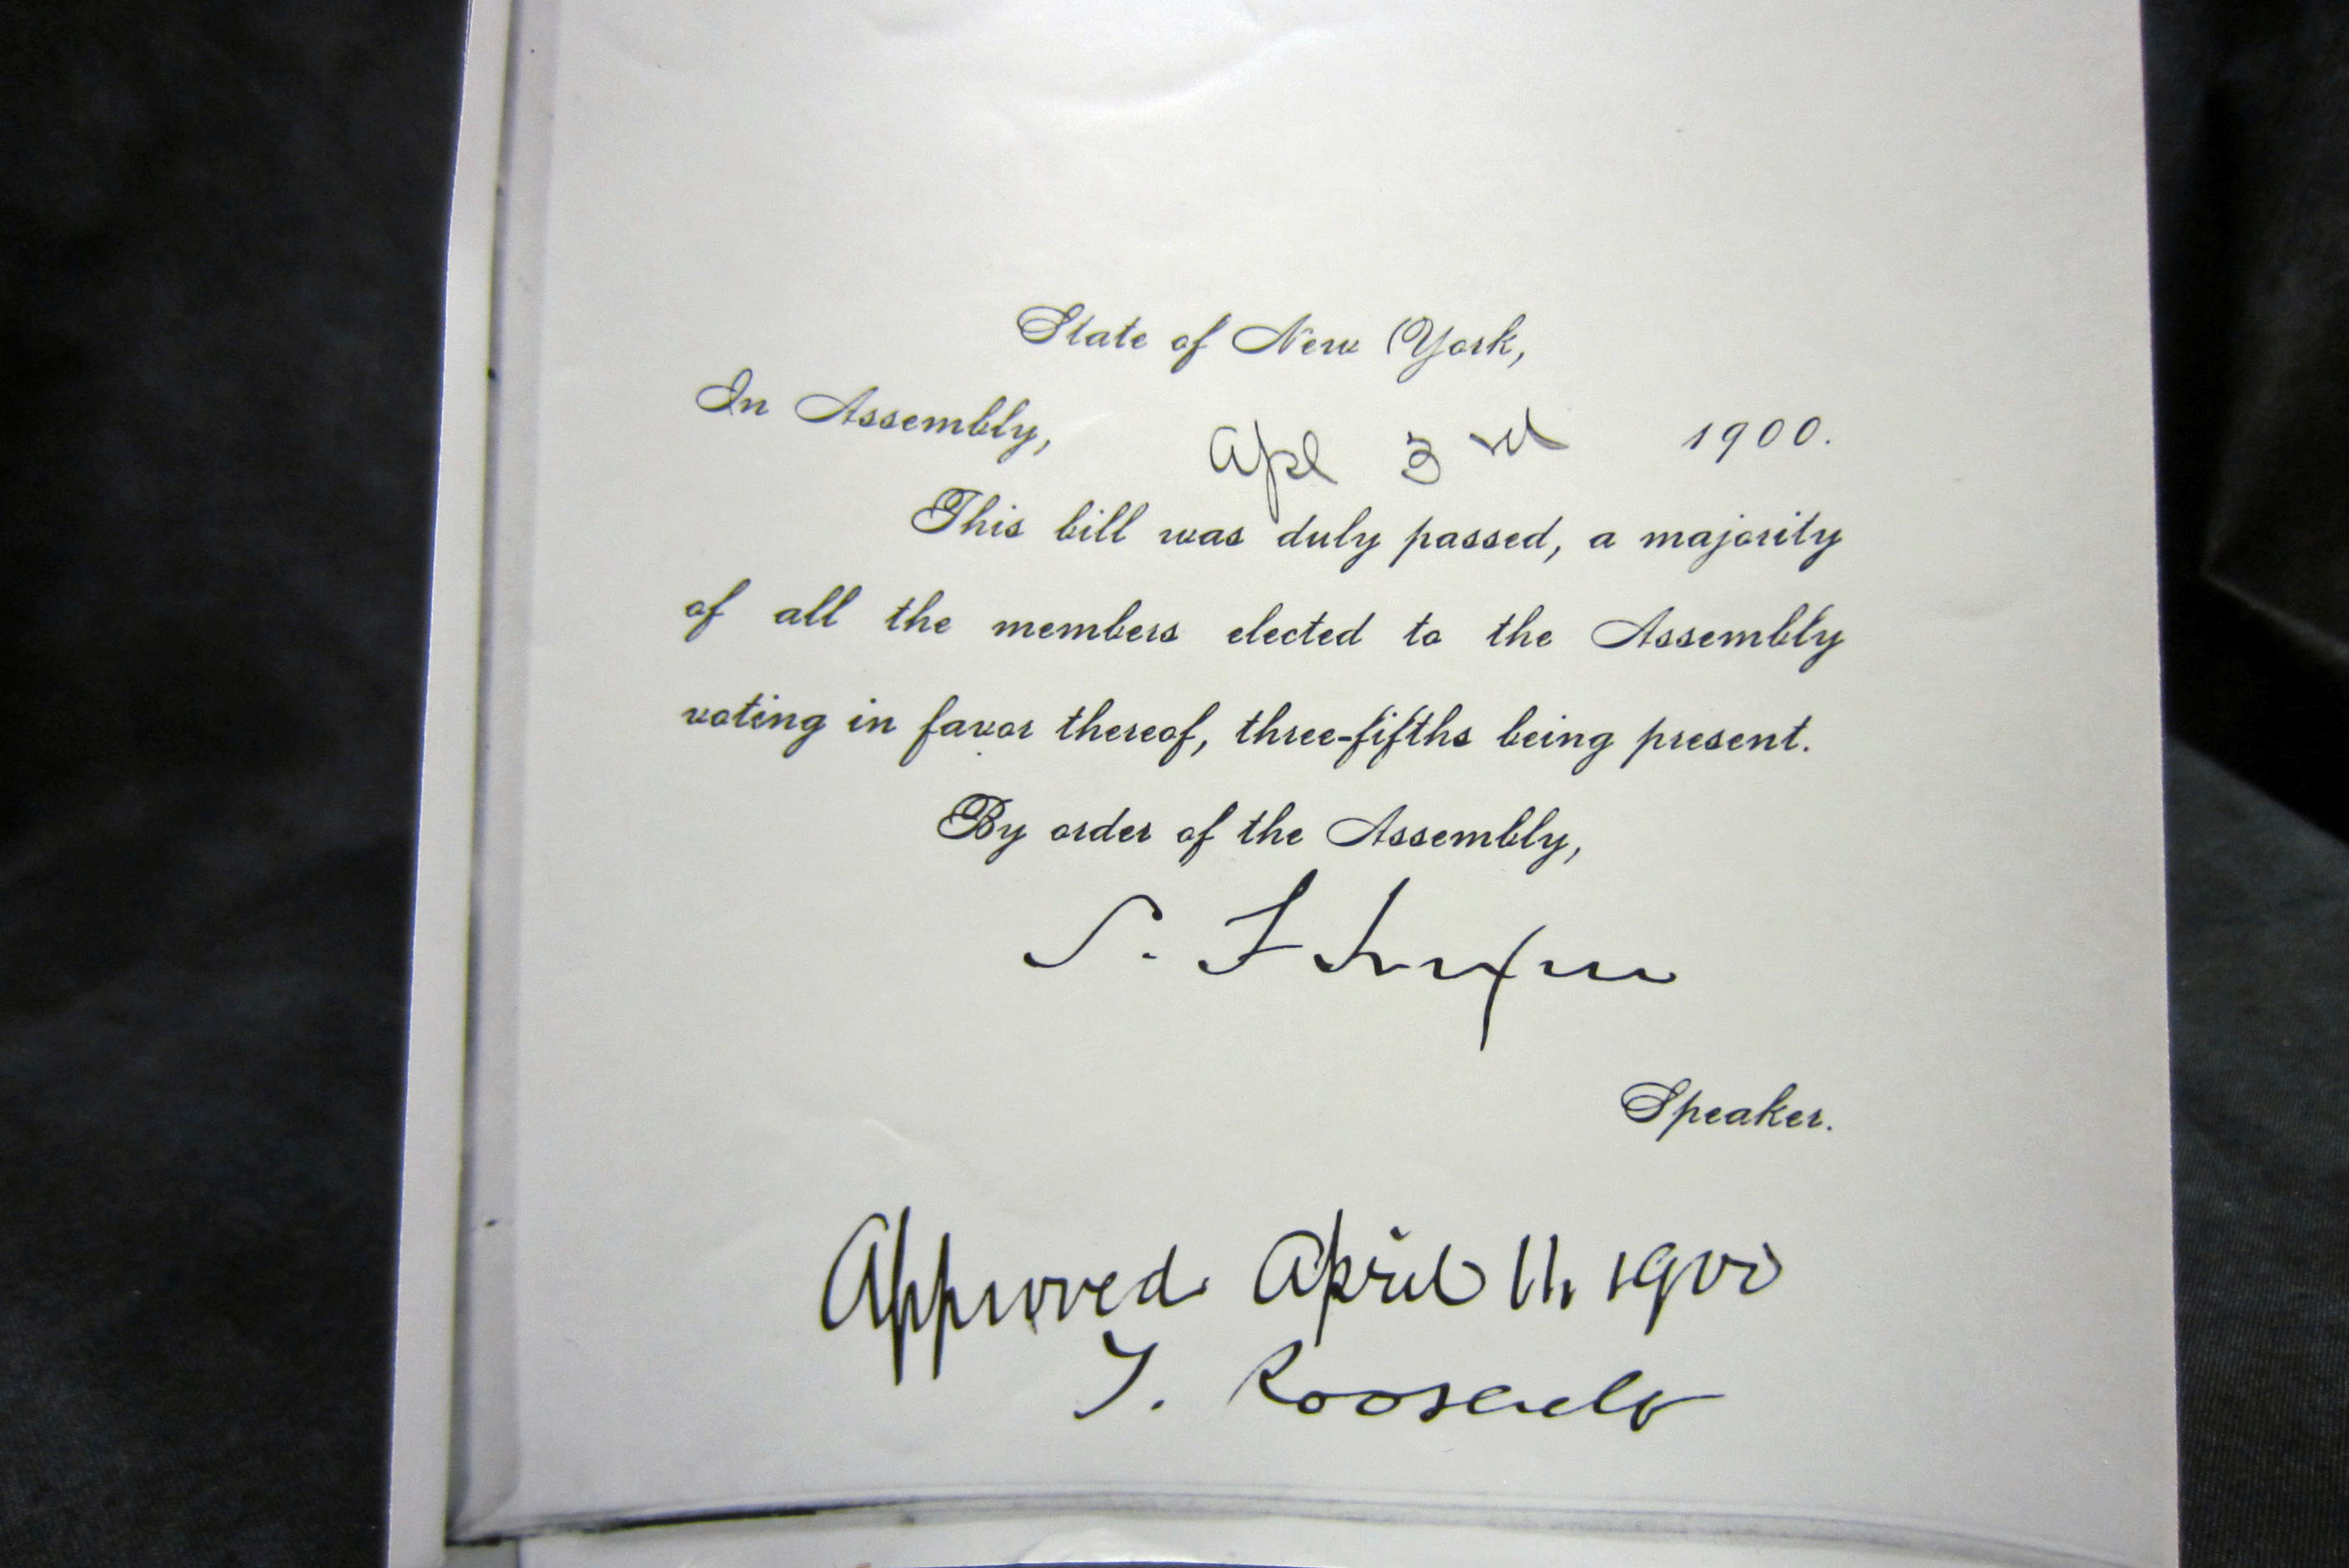 Theodore Roosevelt's Signature establishing The NYS School of Clay-working & Ceramics at Alfred